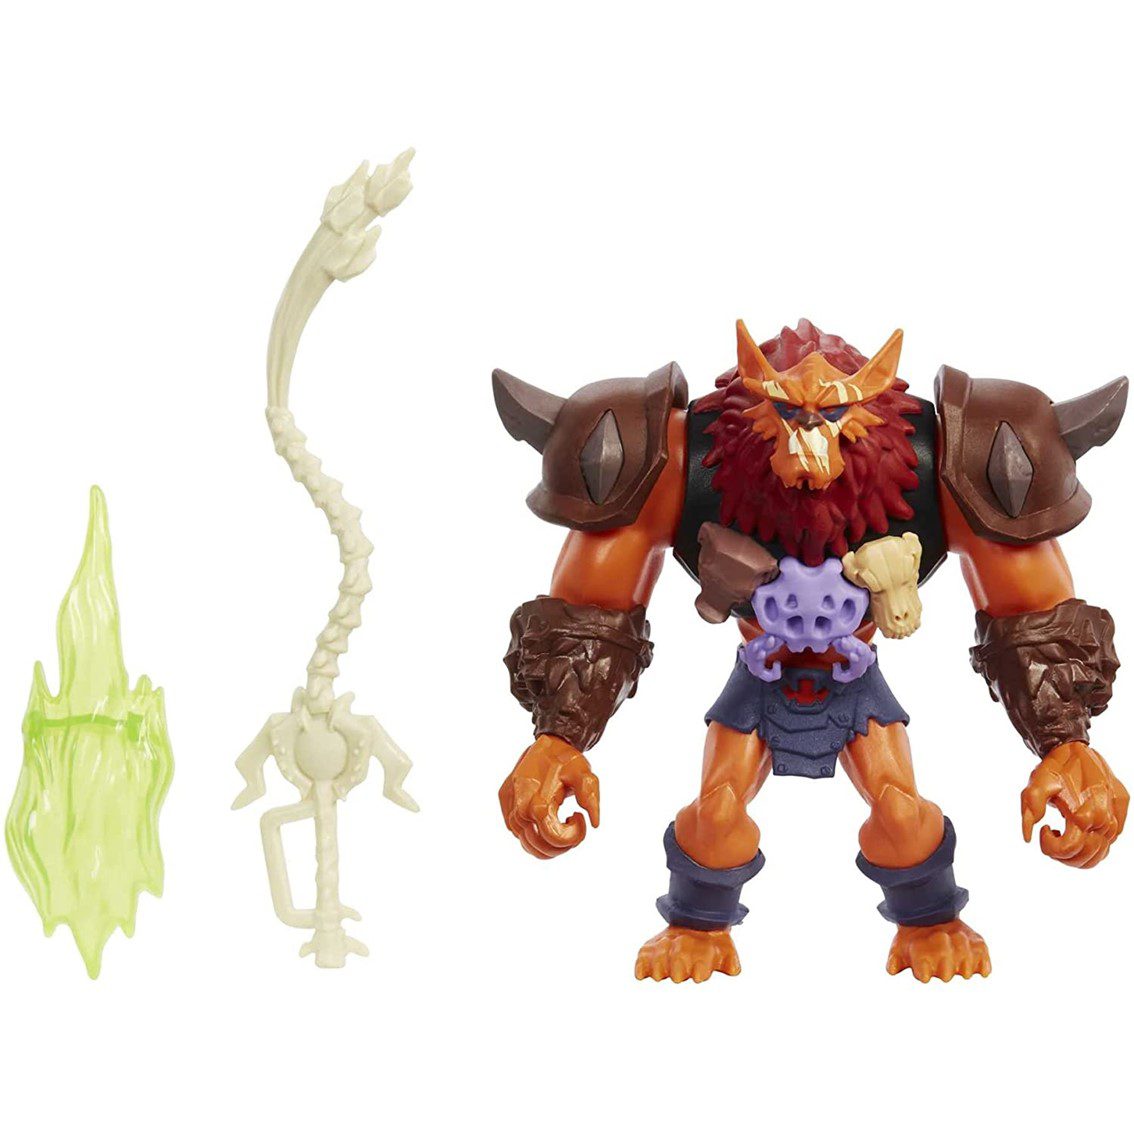 0194735035151-PN-HDY36-Cod.-Articulo-DSP0000006285-Figura-mattel-masters-of-the-universe-beast-man-1